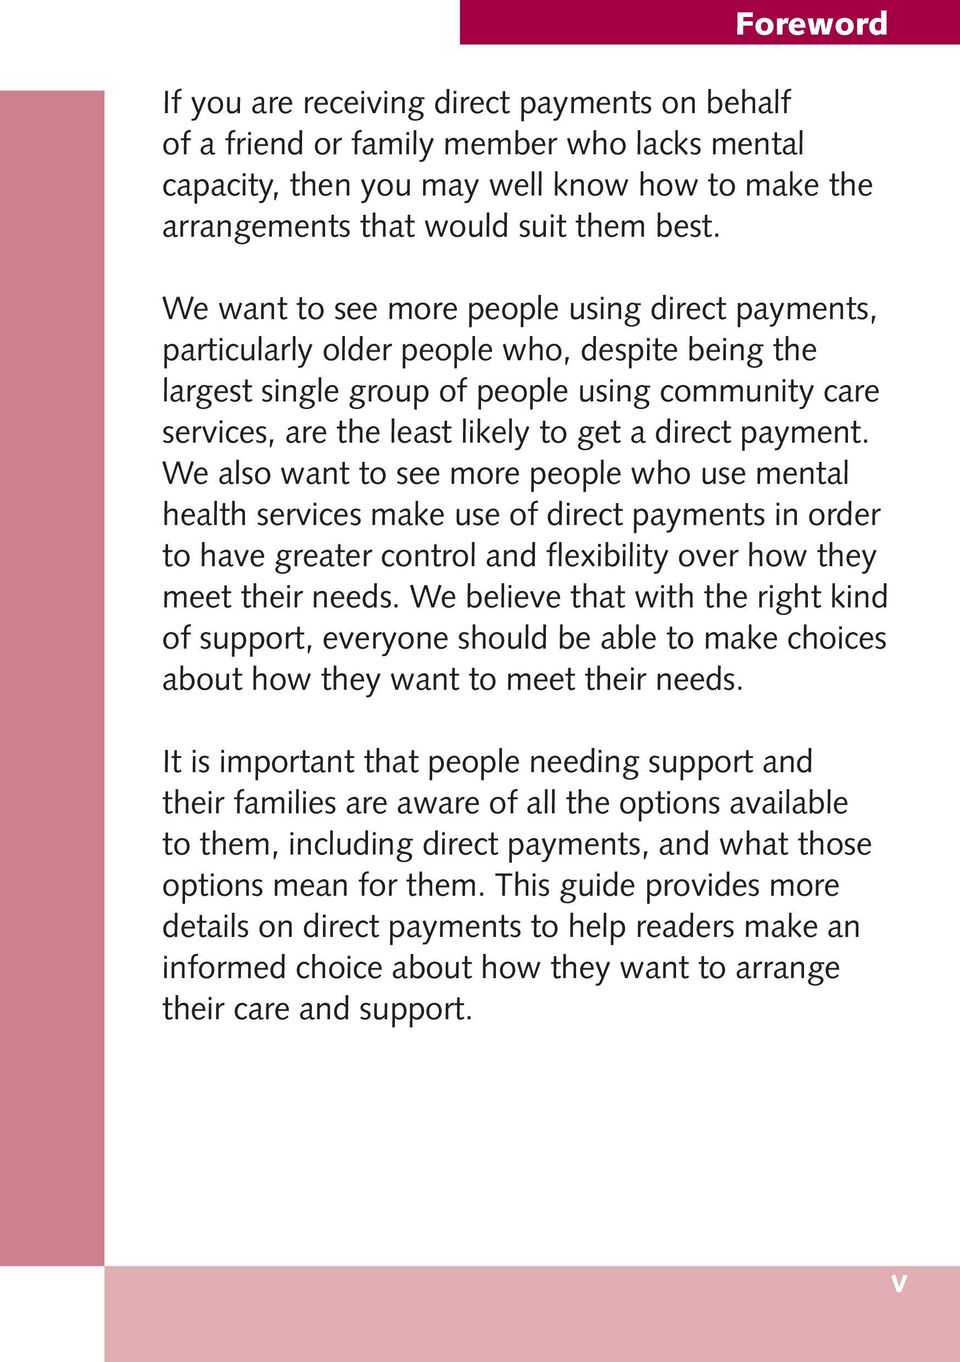 payment. We also want to see more people who use mental health services make use of direct payments in order to have greater control and flexibility over how they meet their needs.